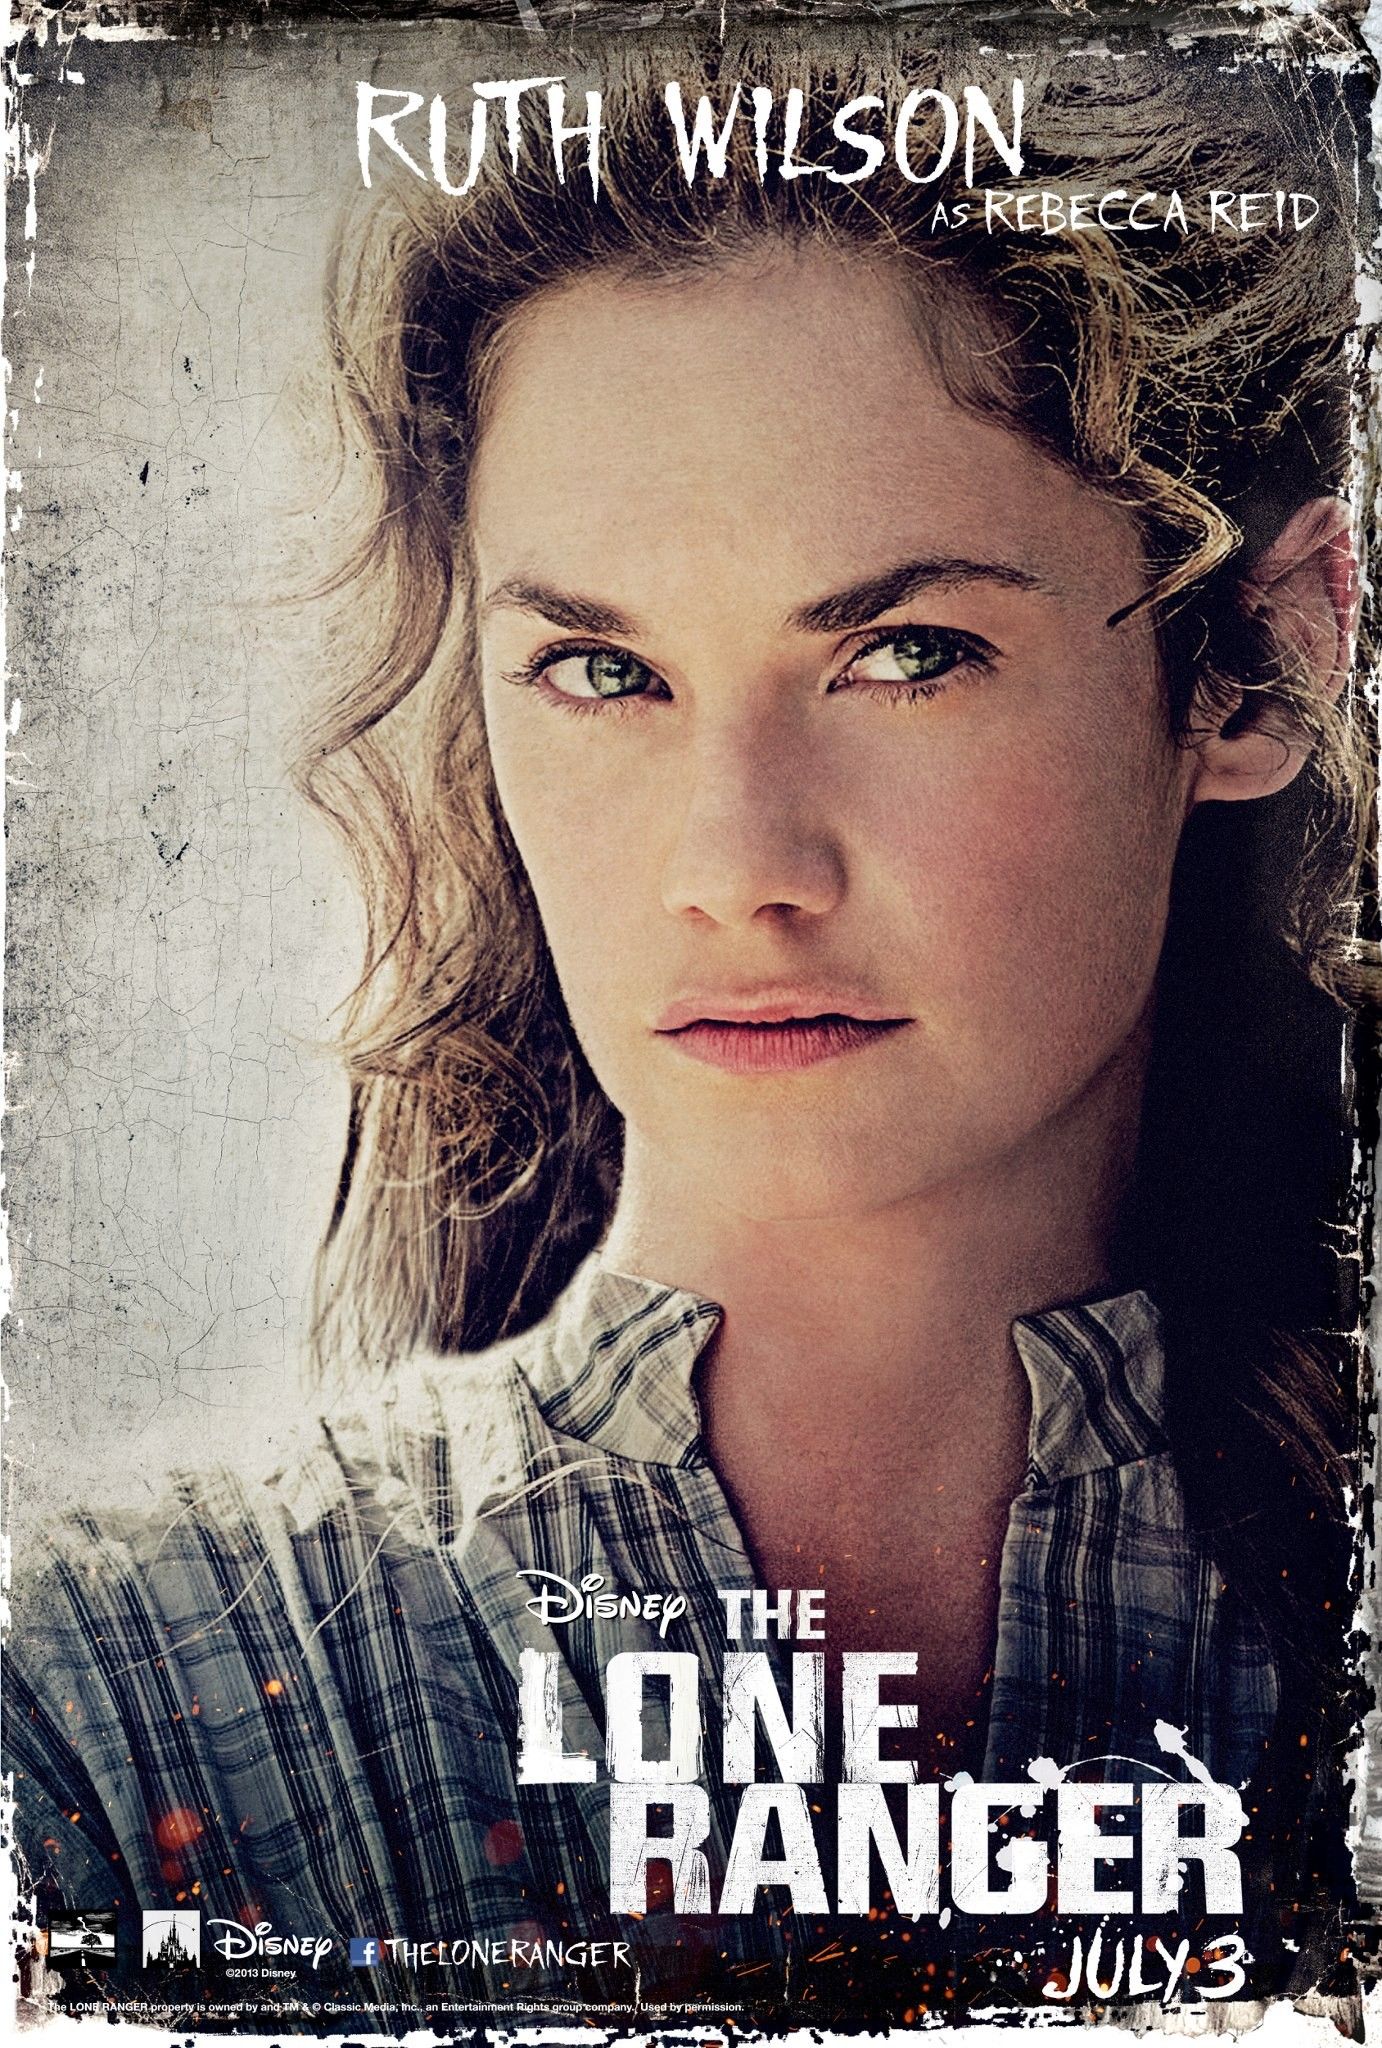 the Lone Ranger Poster with Ruth Wilson